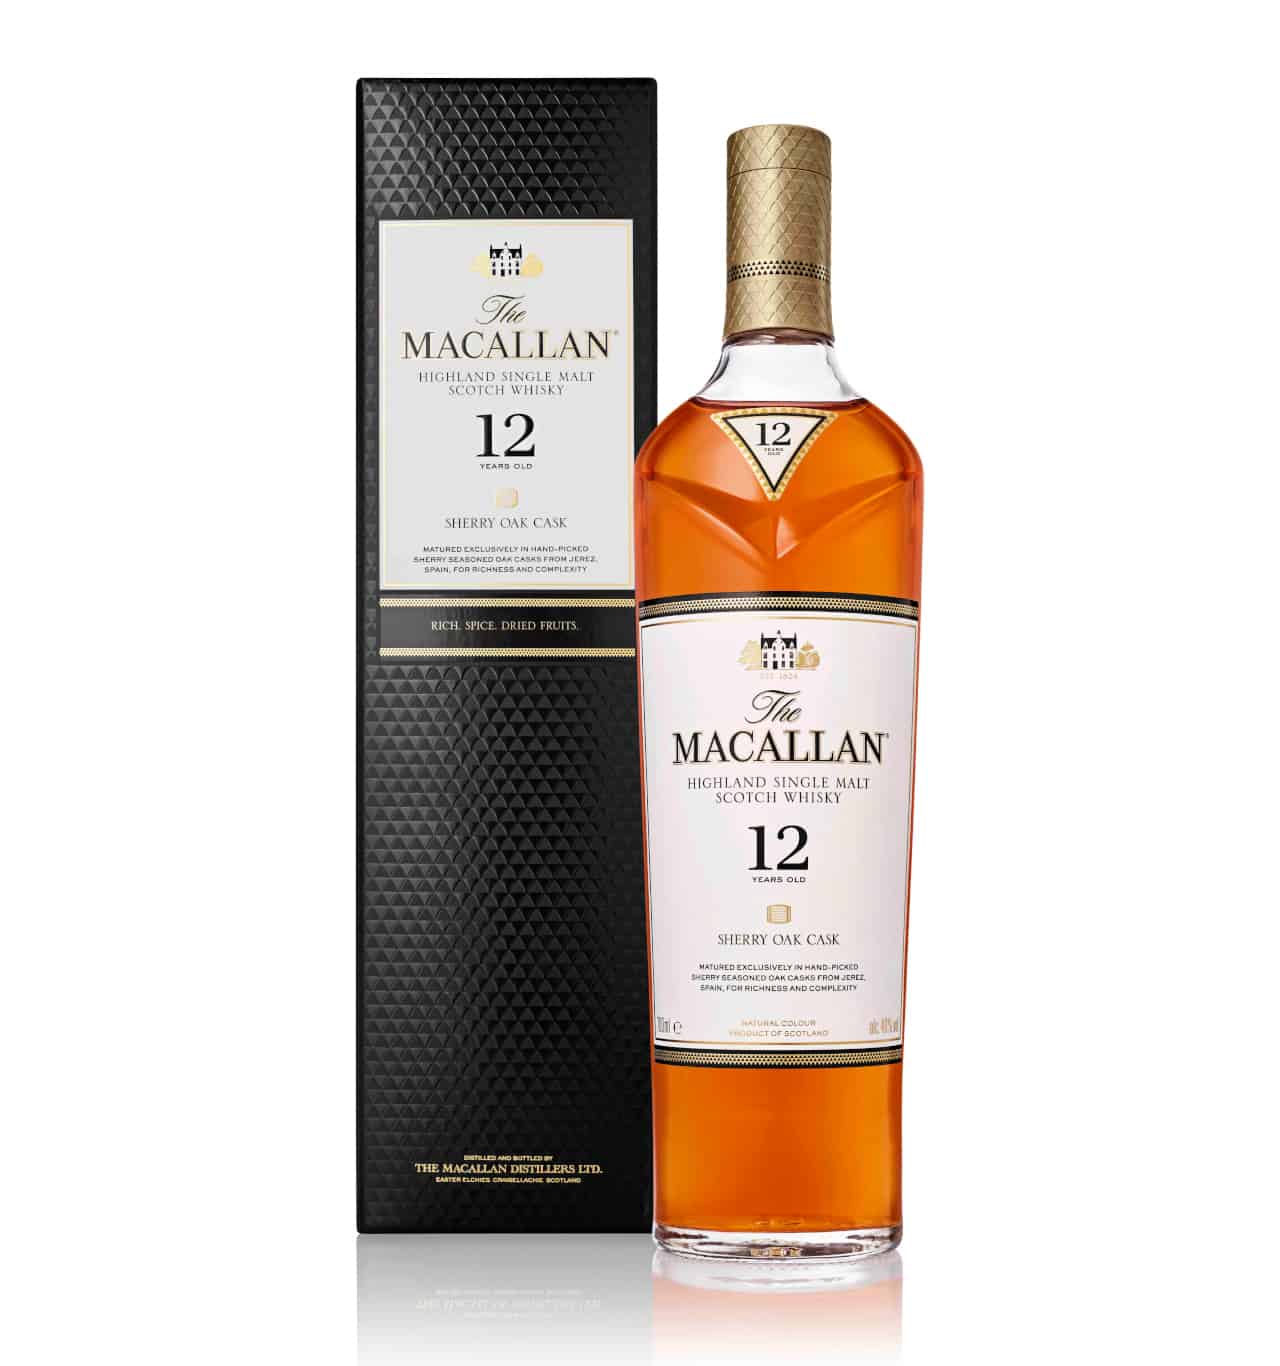 Bottle and packaging shot of new Macallan scotch whisky